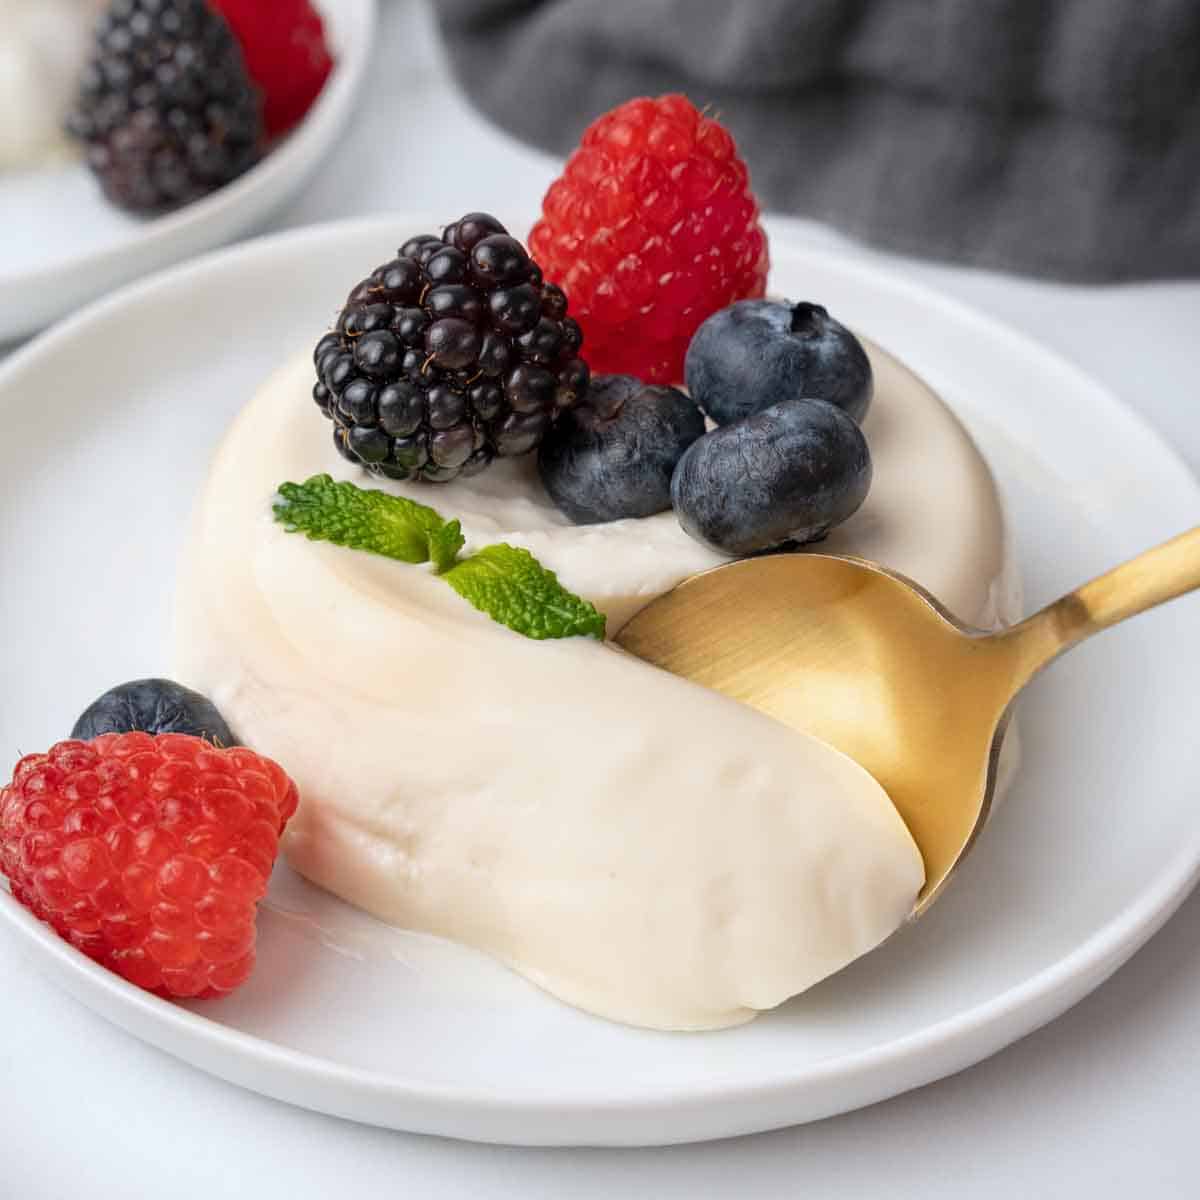 taking a spoonful out of the panna cotta with berries.